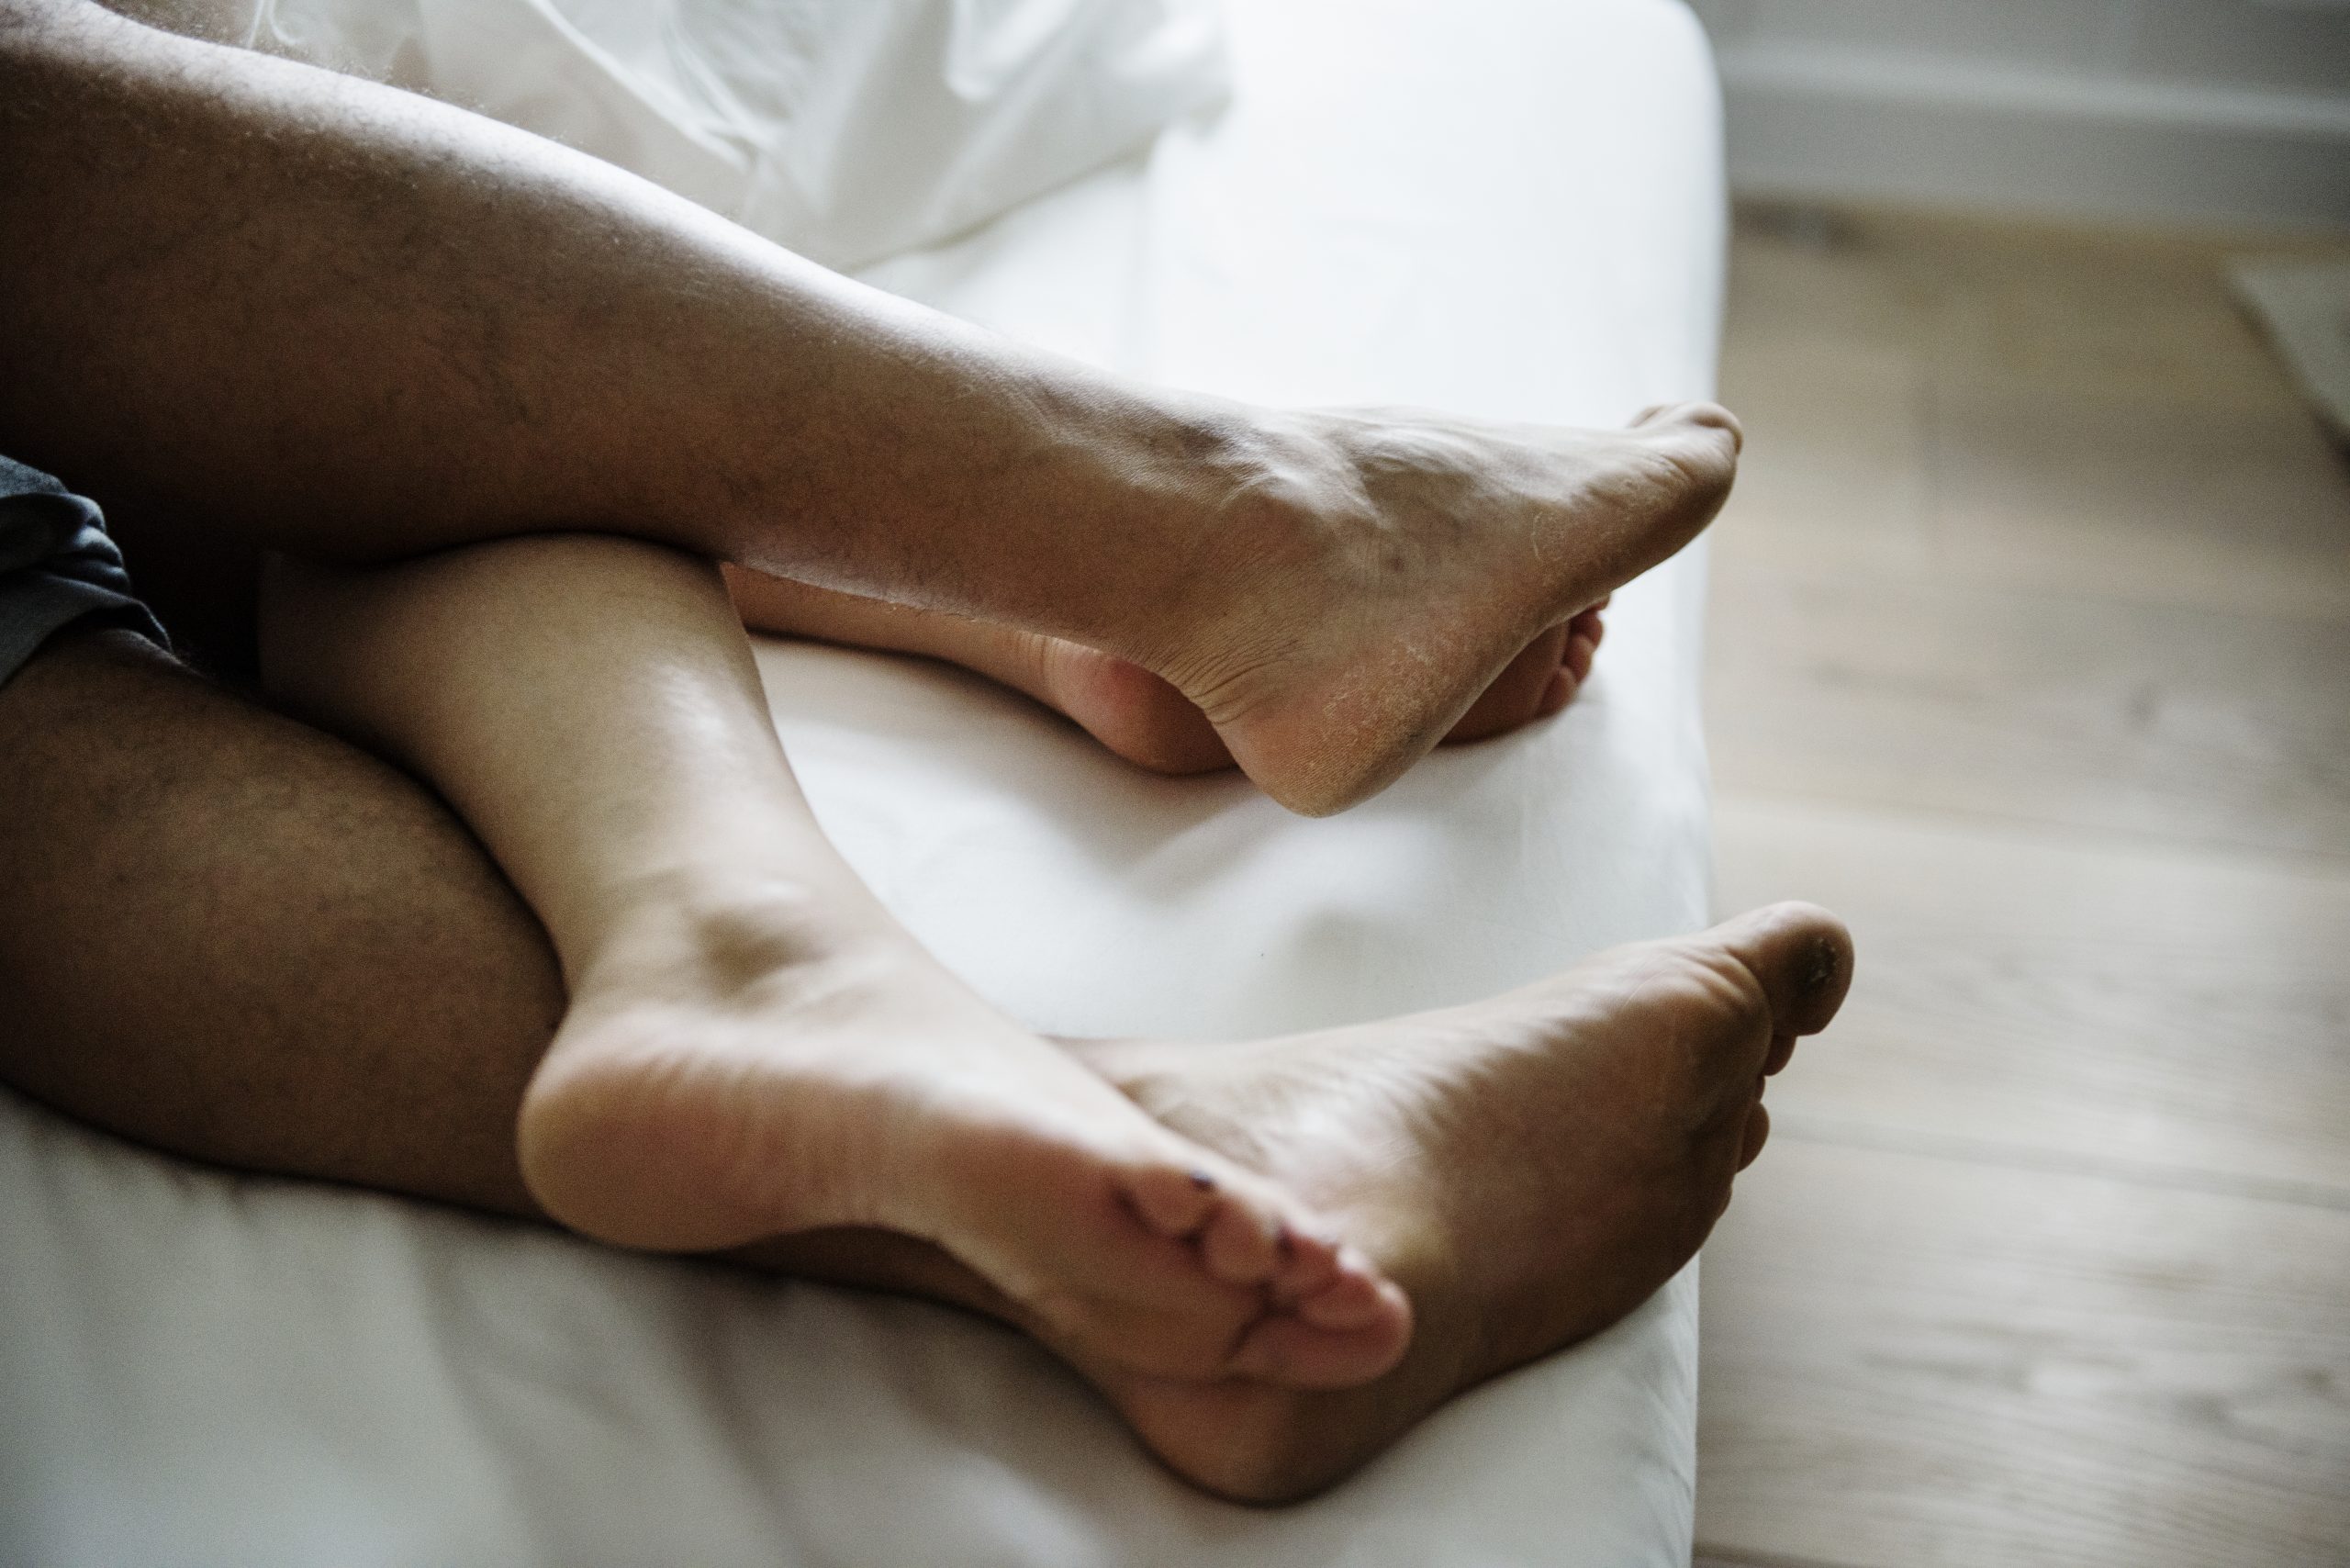 The importance of aftercare after sex - The Signal